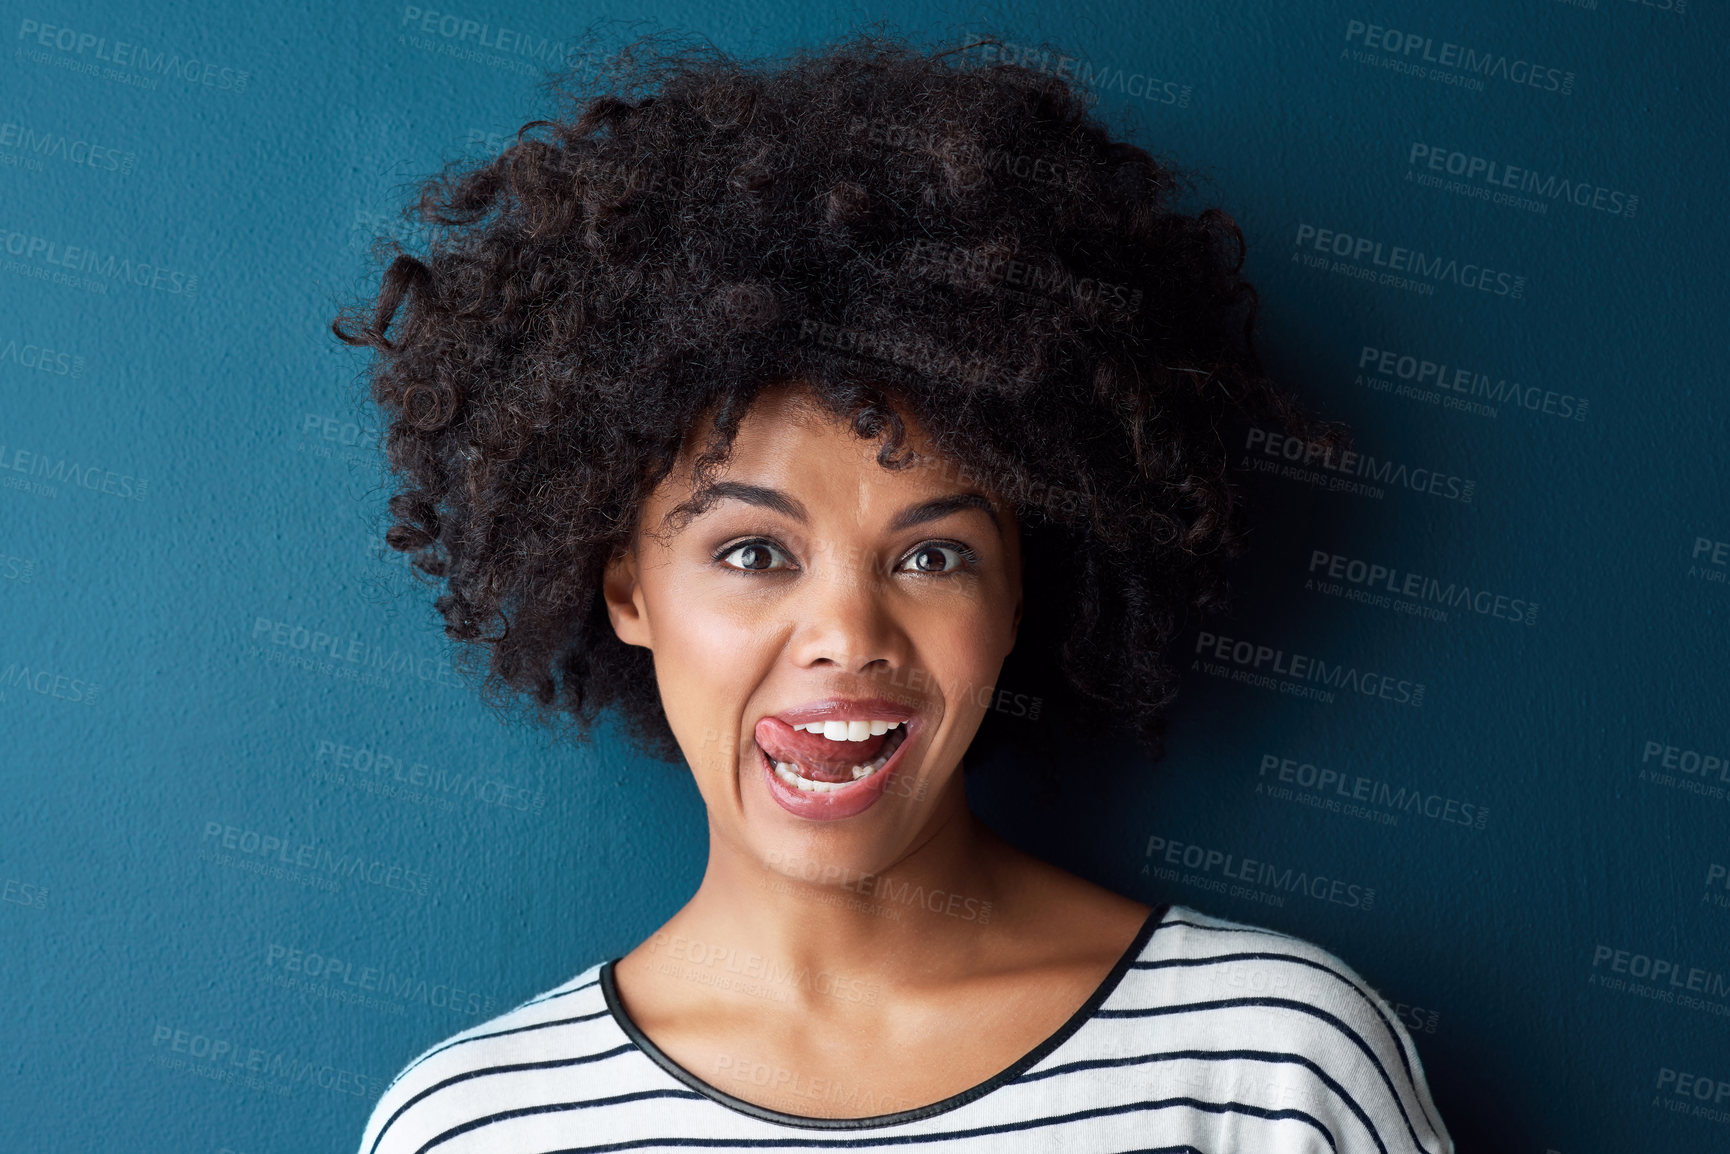 Buy stock photo Studio portrait of an attractive young woman sticking her tongue out against a blue background